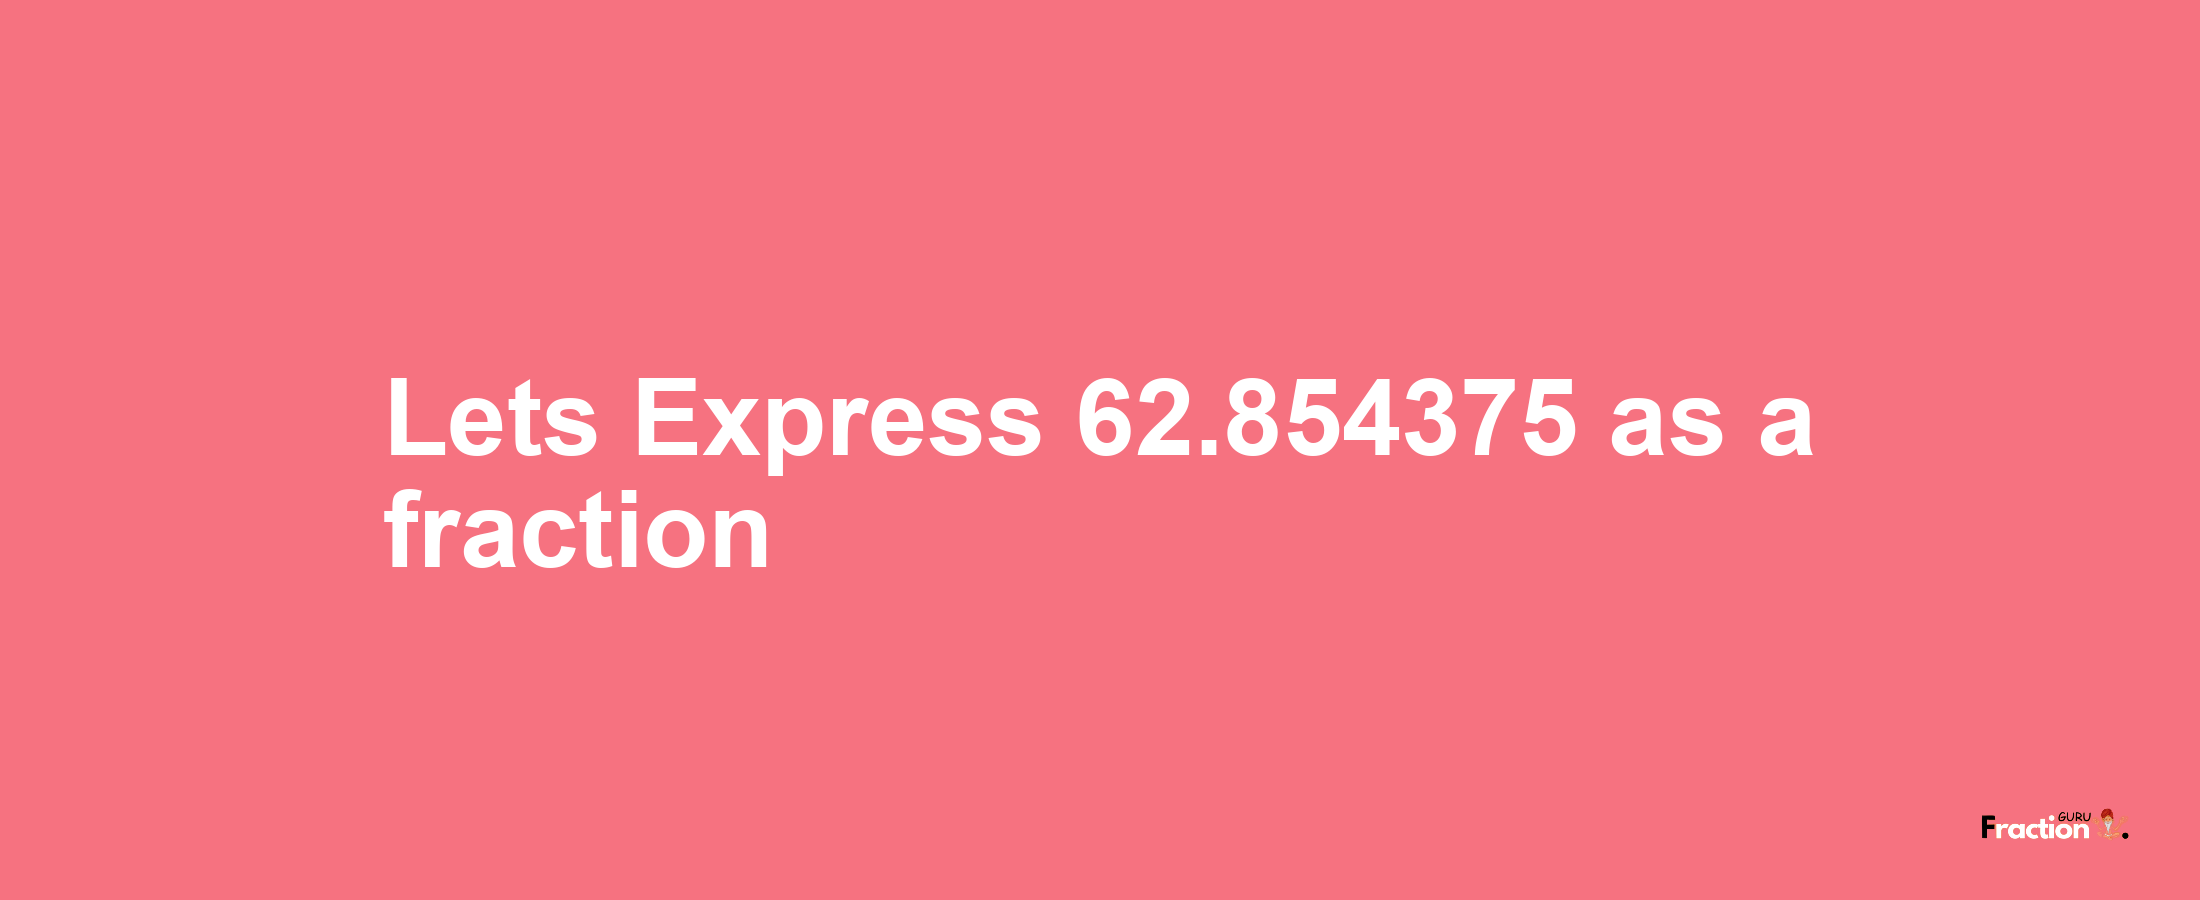 Lets Express 62.854375 as afraction